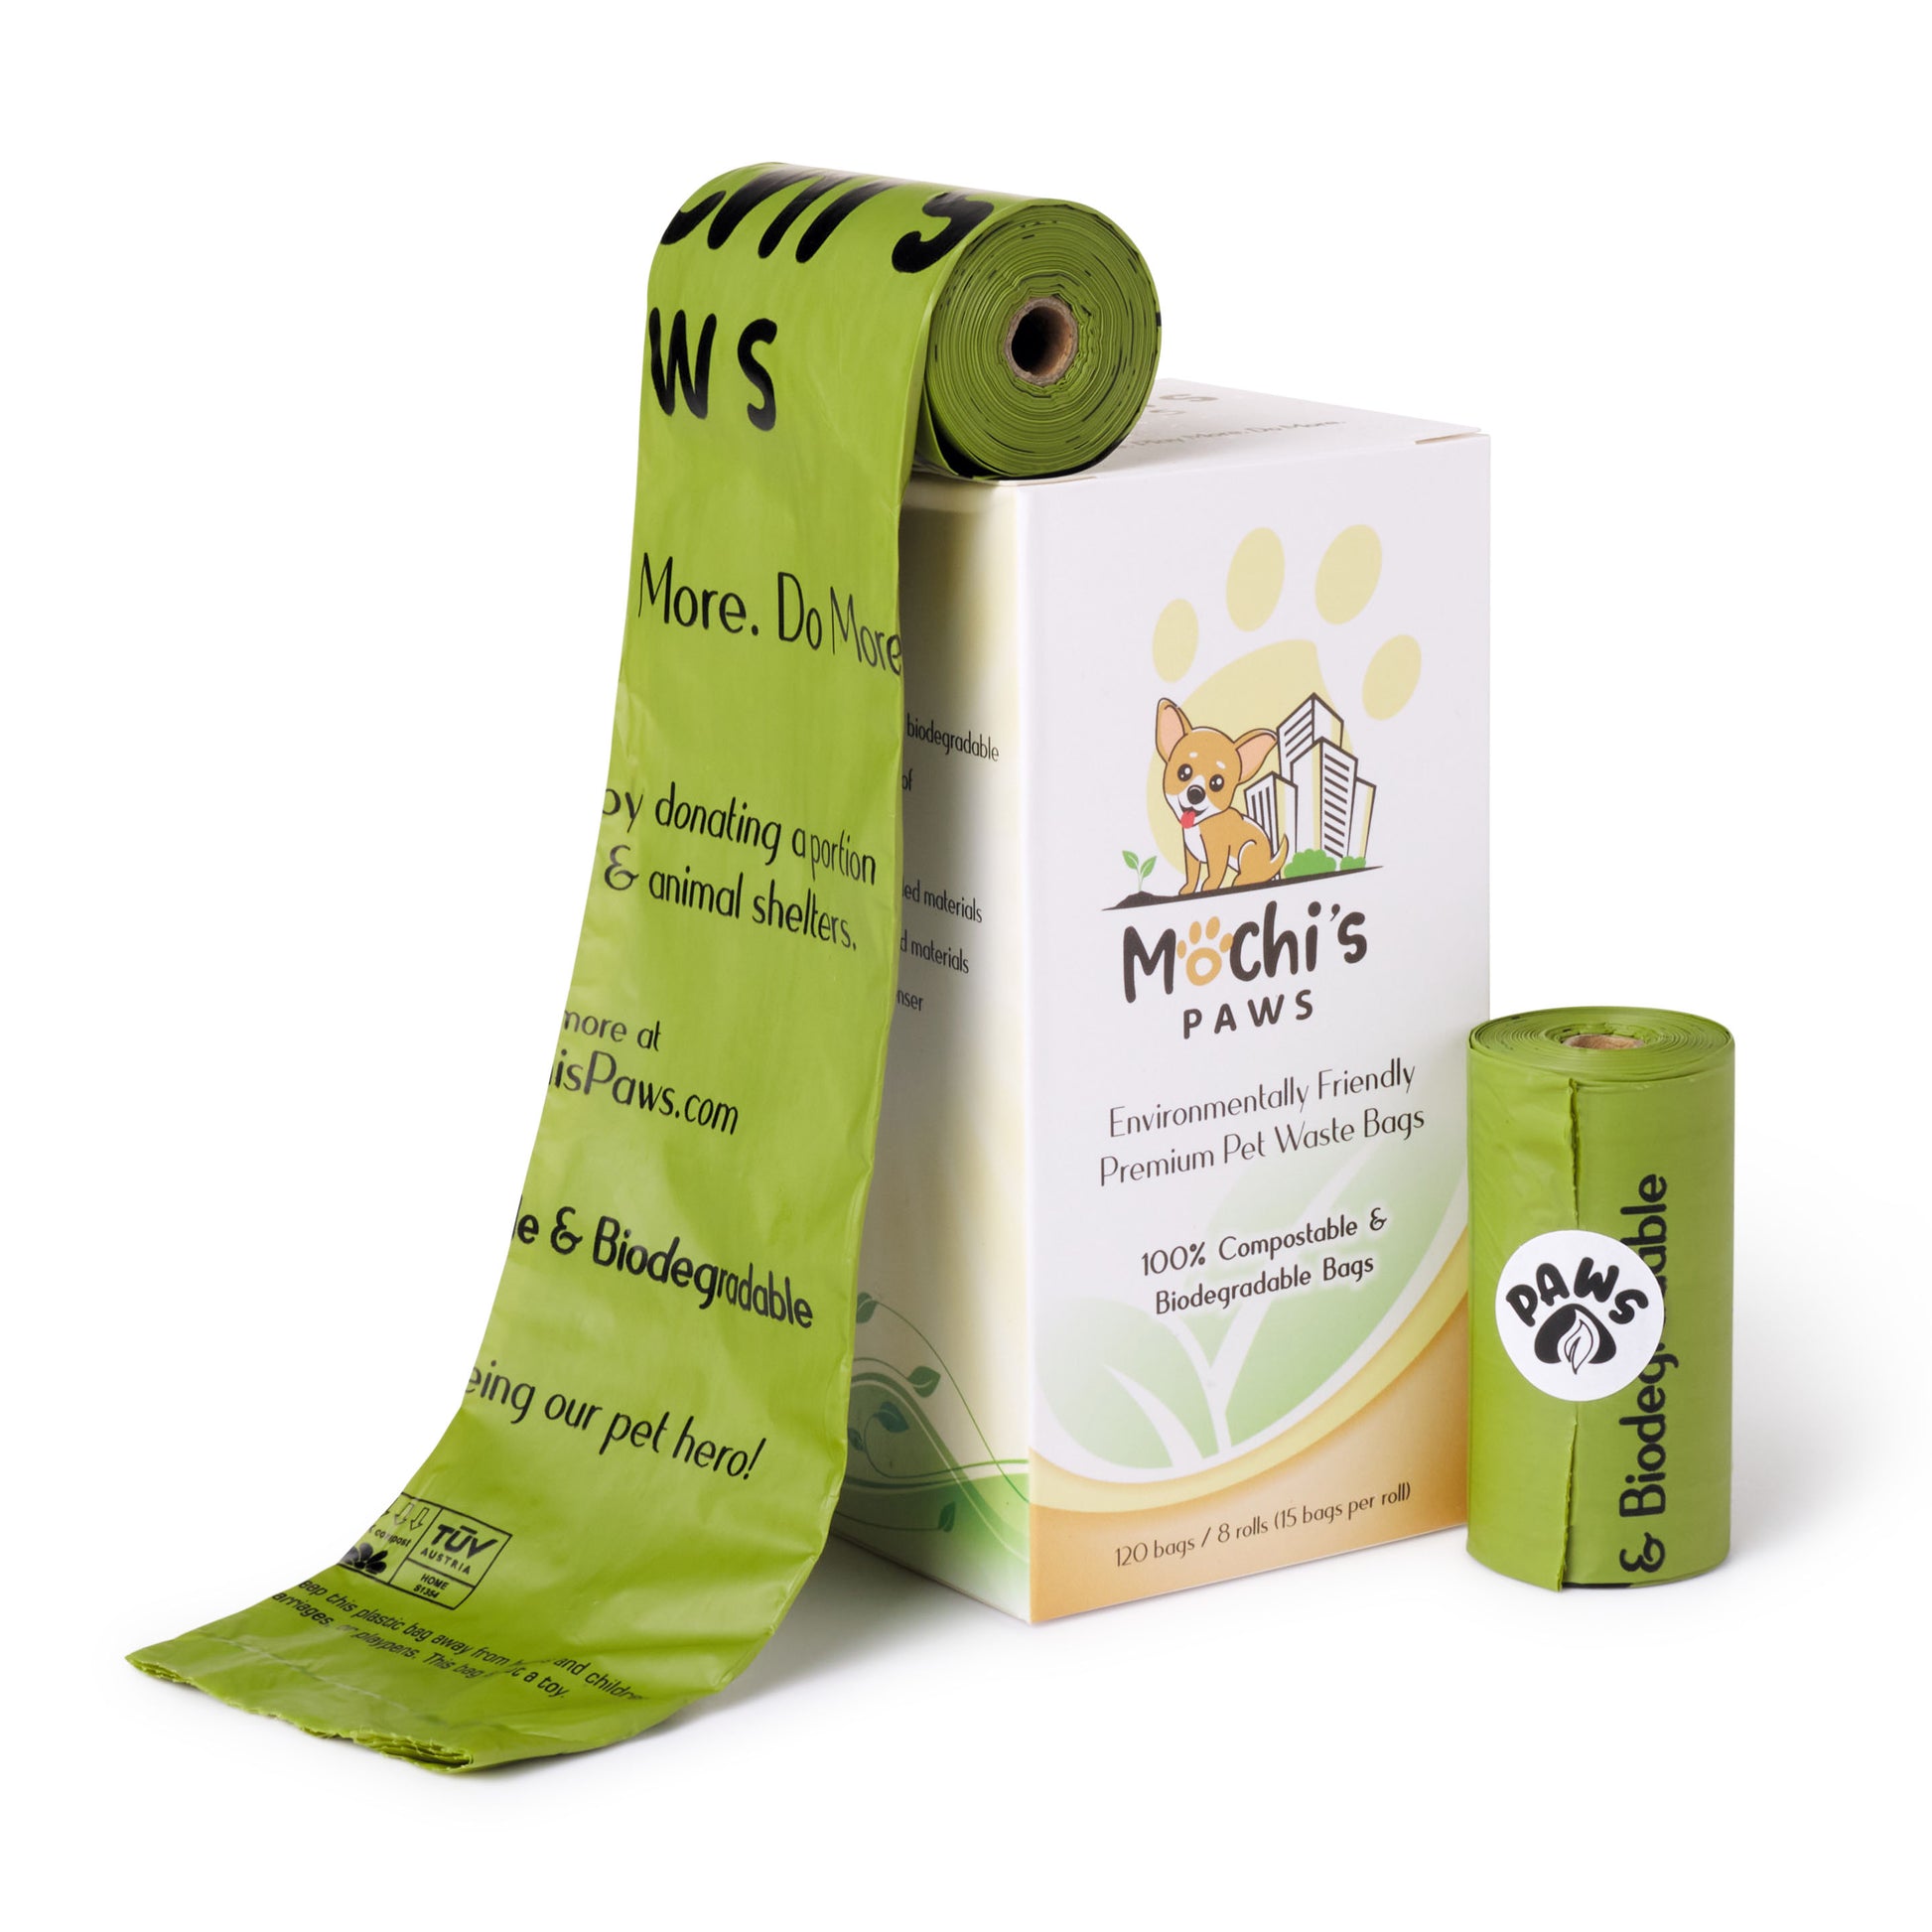 mochi's paws  compostable and biodegradable poop waste bags